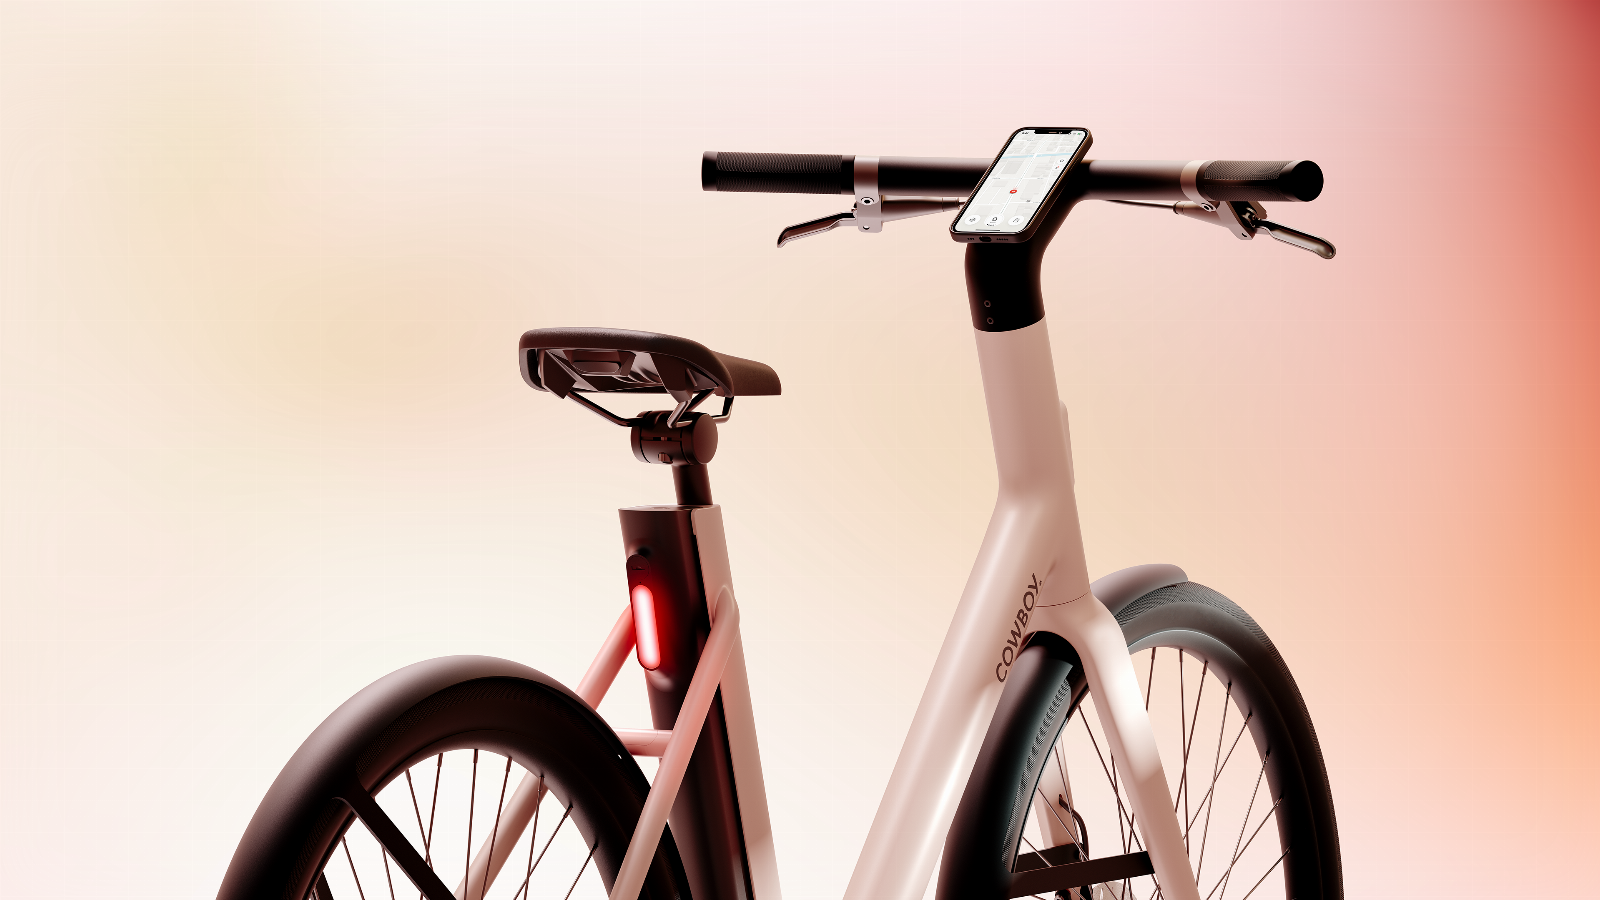 First they worked in tandem, now they’re in an e-bike patent suit